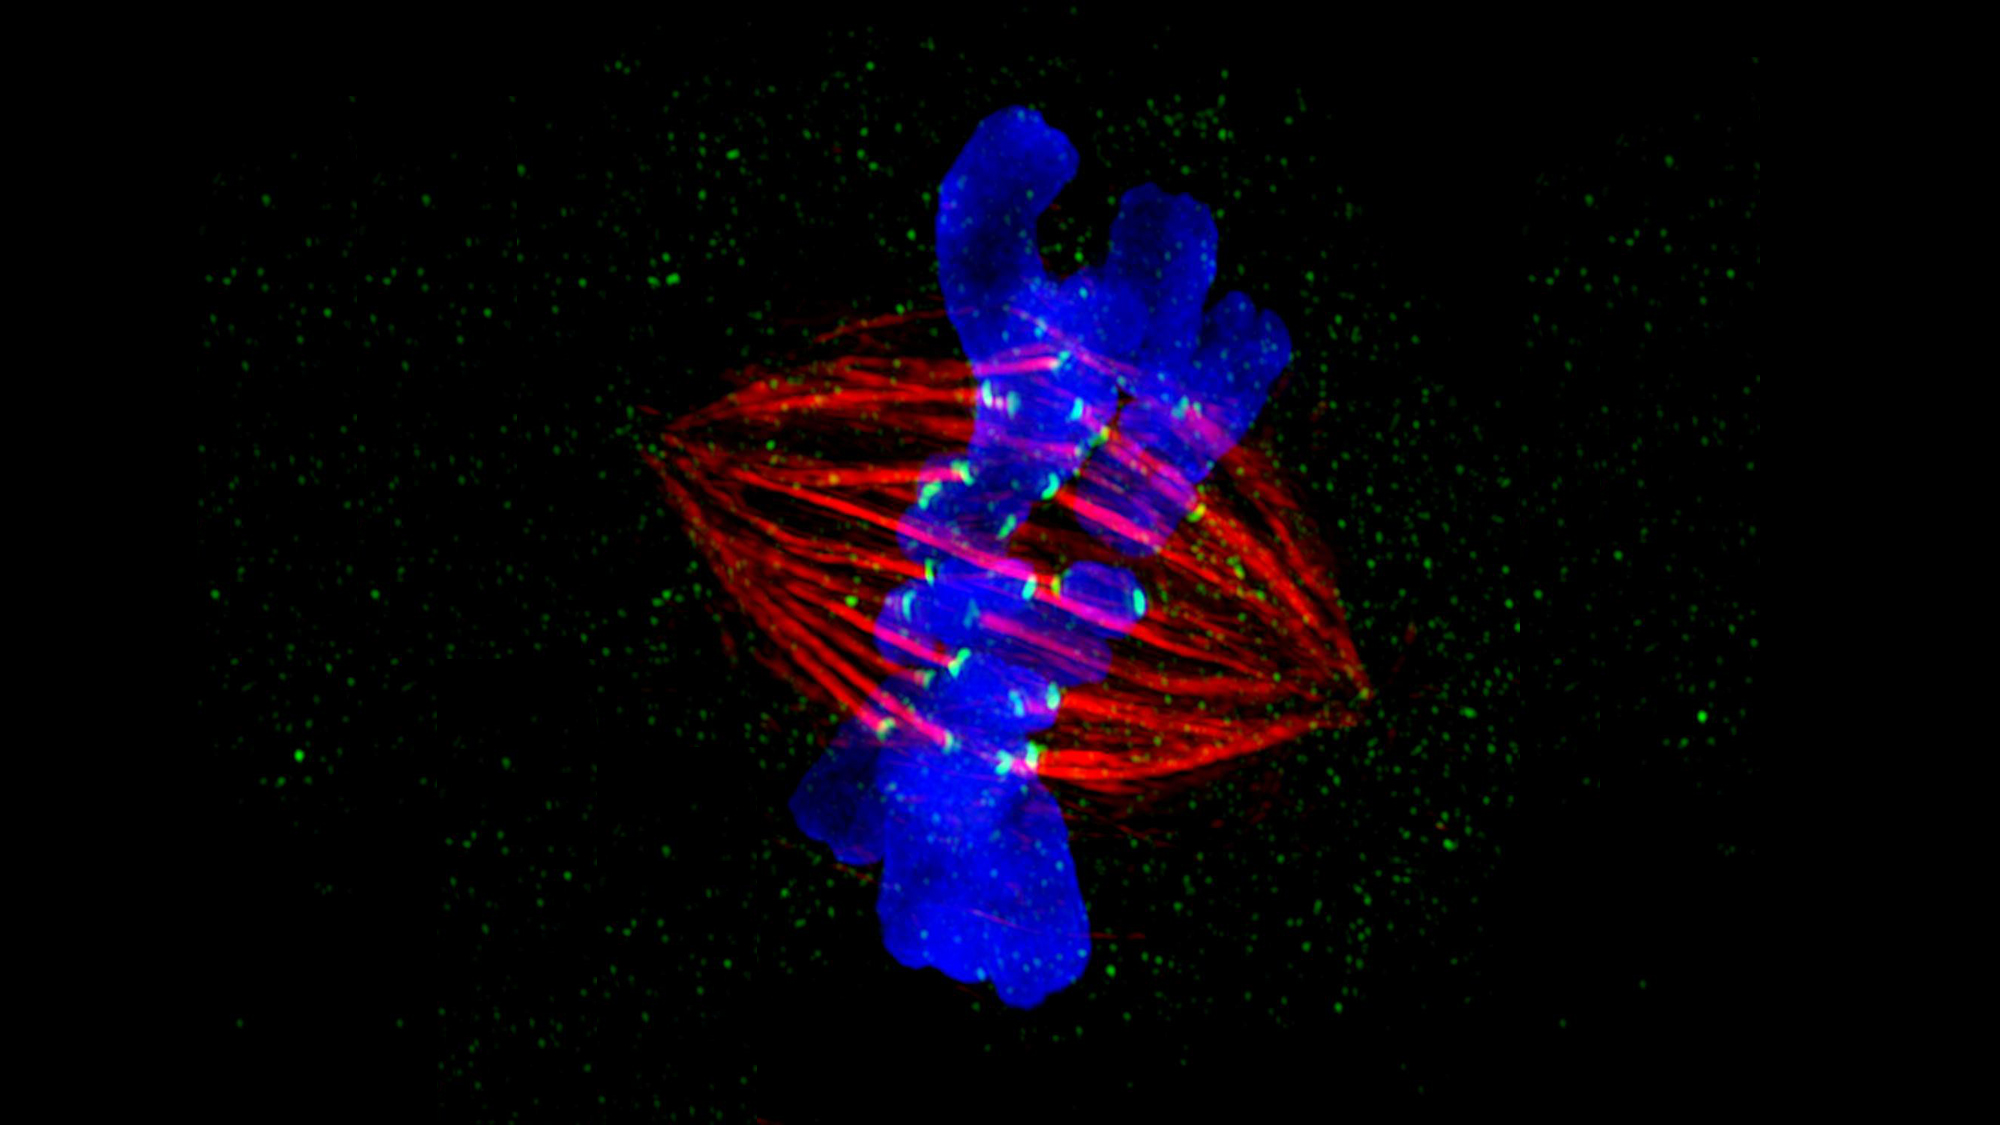 One of the 10 milion € grants will try to understand one of the most fundamental processes in life – cell division. Photo by ZEISS Microscopy on Foter.com / CC BY-NC-ND